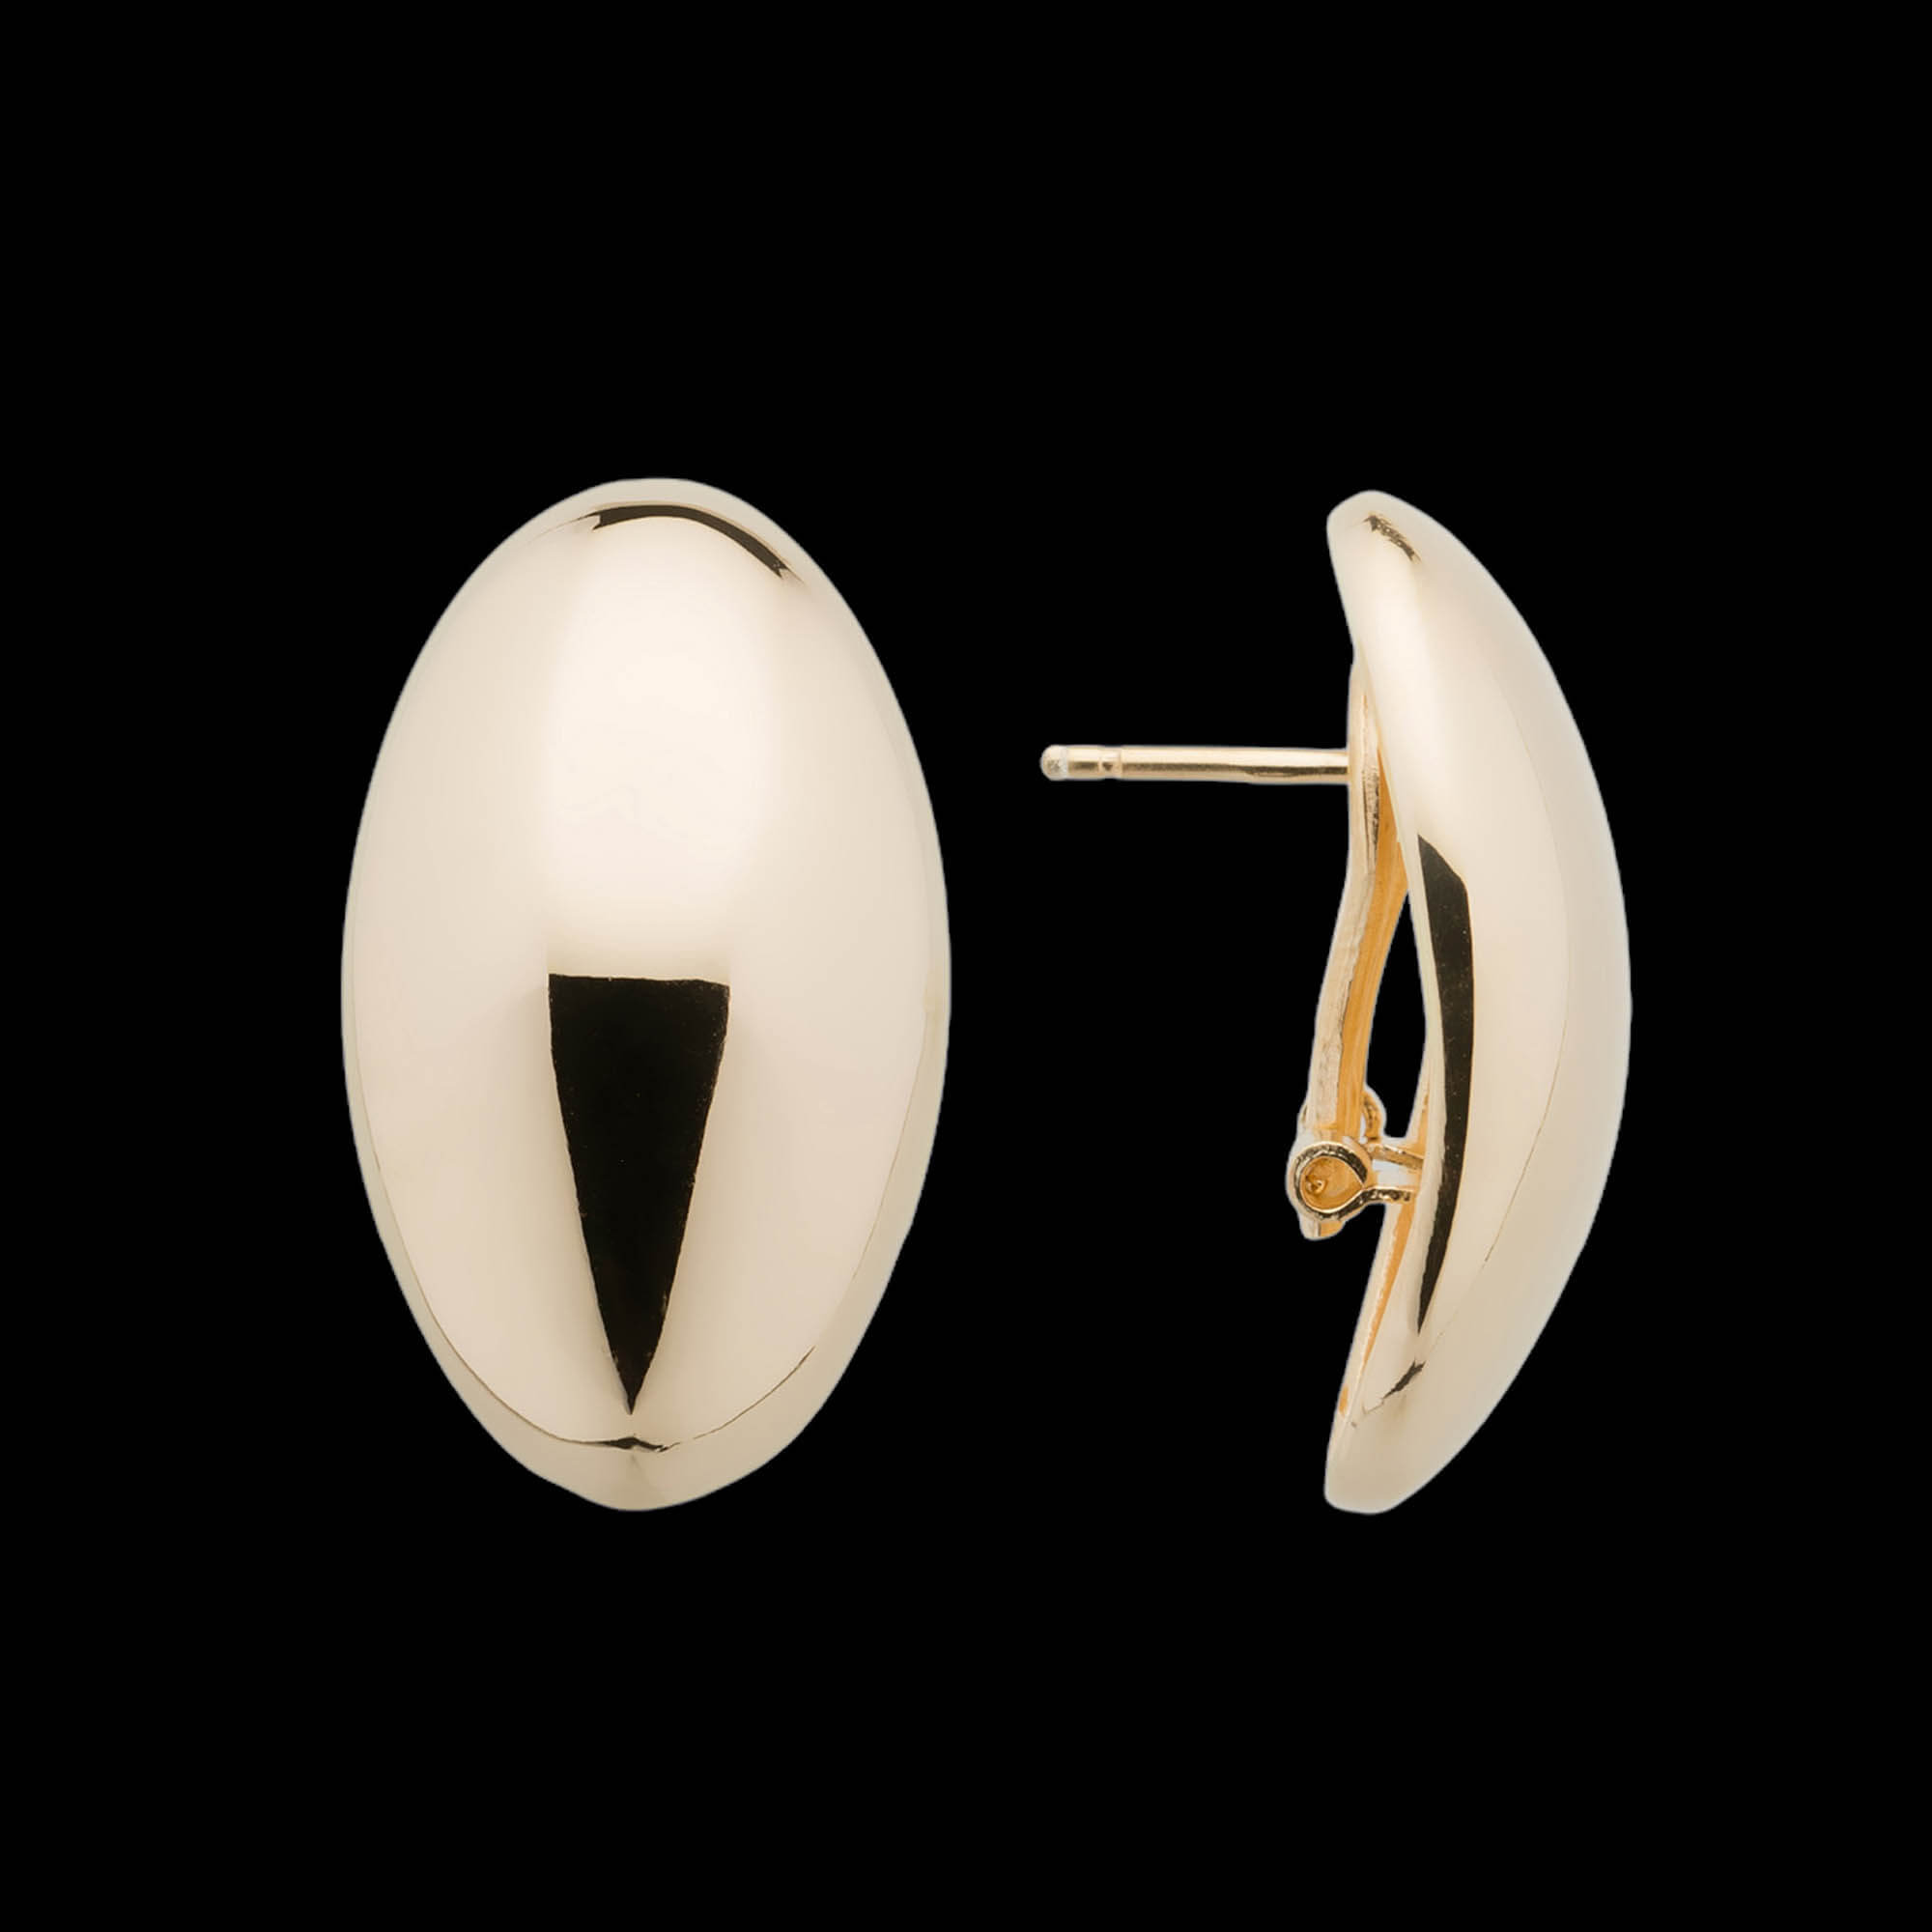 Gold and polished oval earrings